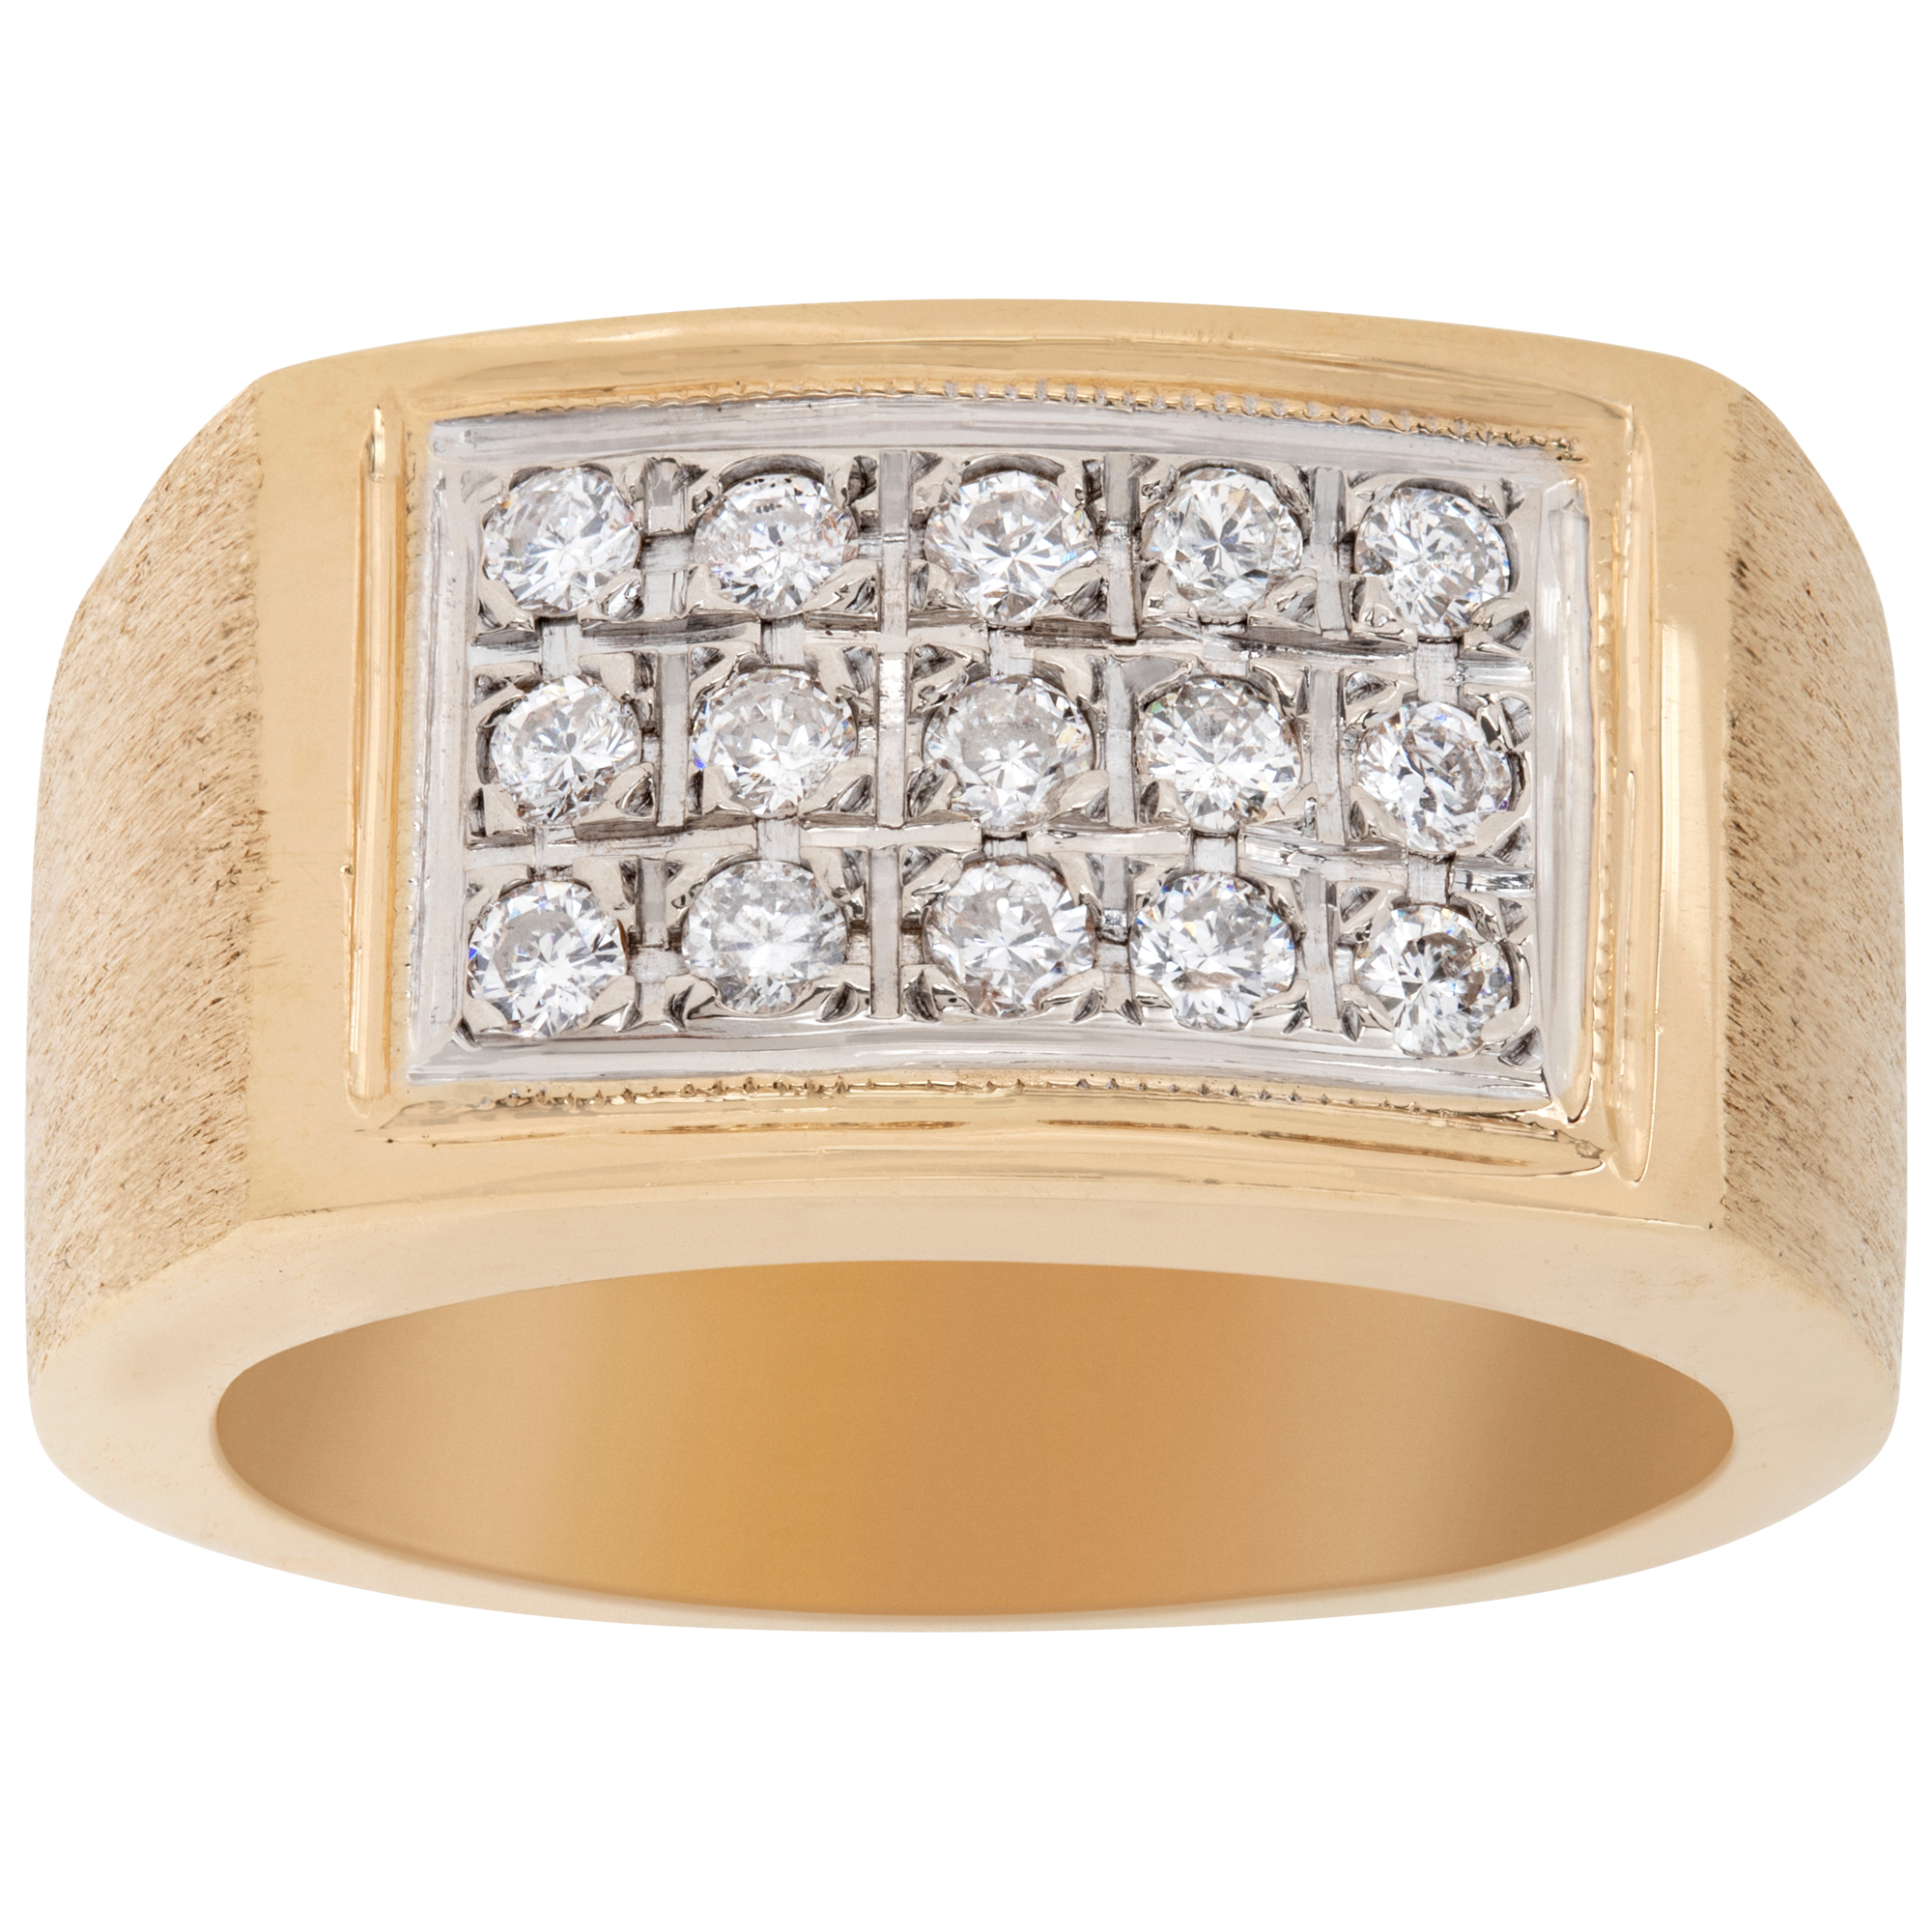 Gents solid diamond ring in 14k yellow gold.  0.70 carats in diamonds. Size 8 image 1